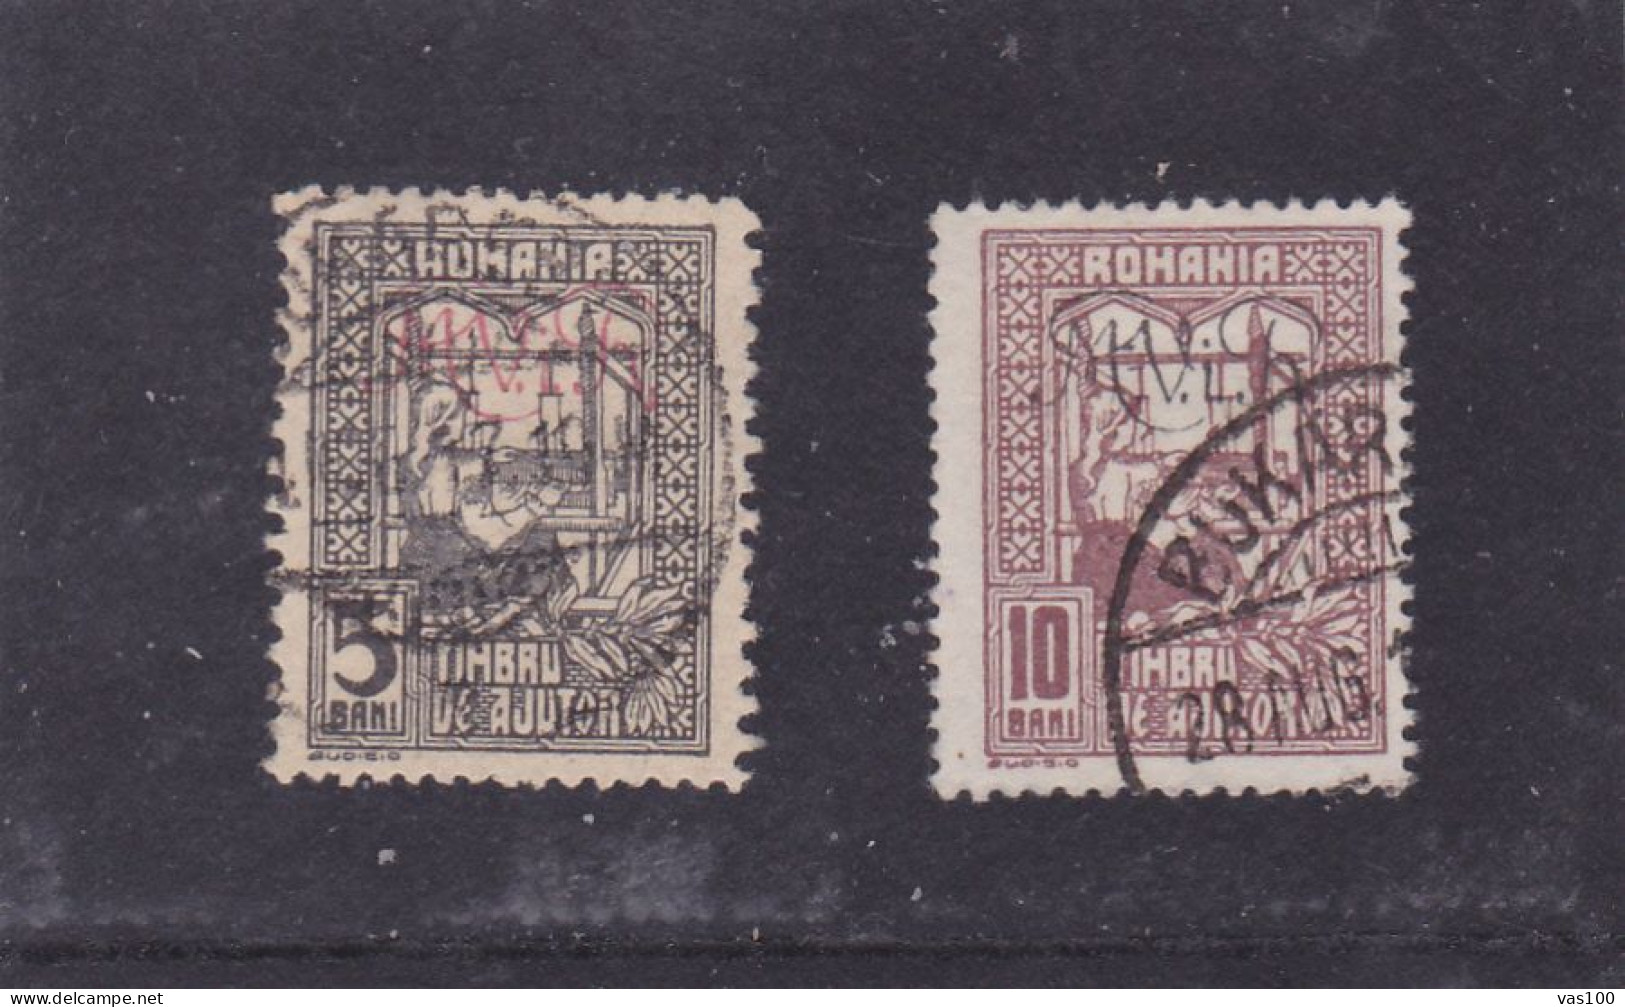 Germany WW1 Occupation In Romania 1917 MViR  2 STAMPS POSTAGE DUE USED - Ocupaciones